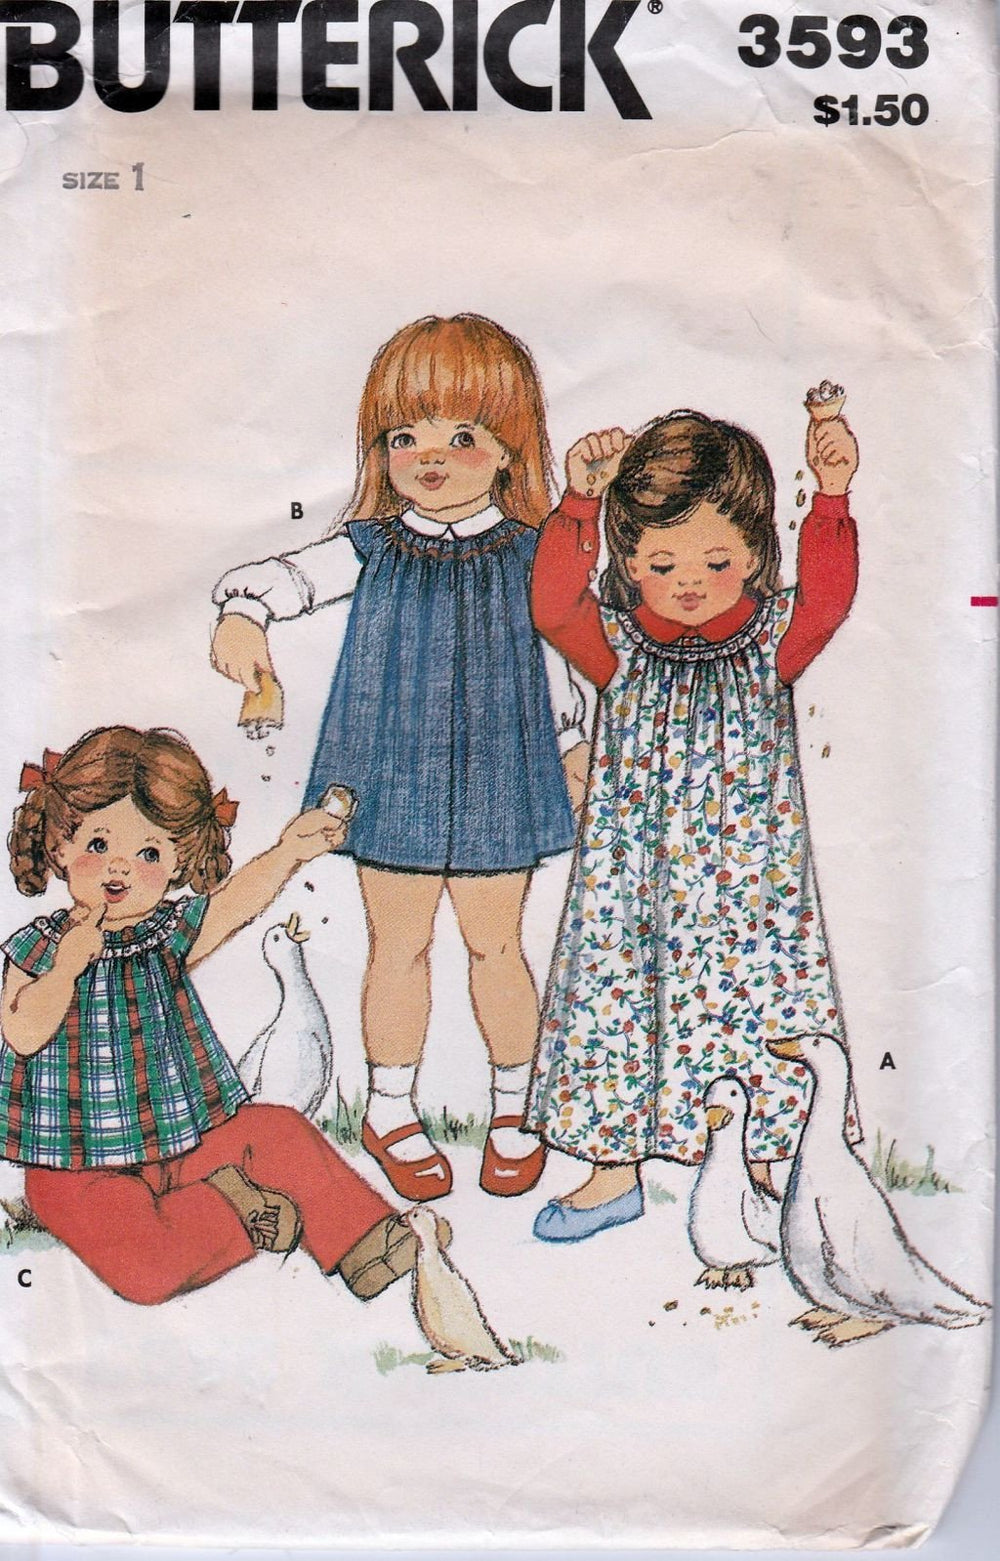 Butterick 3593 Vintage 80's Sewing Pattern Toddlers Dress Top - VintageStitching - Vintage Sewing Patterns